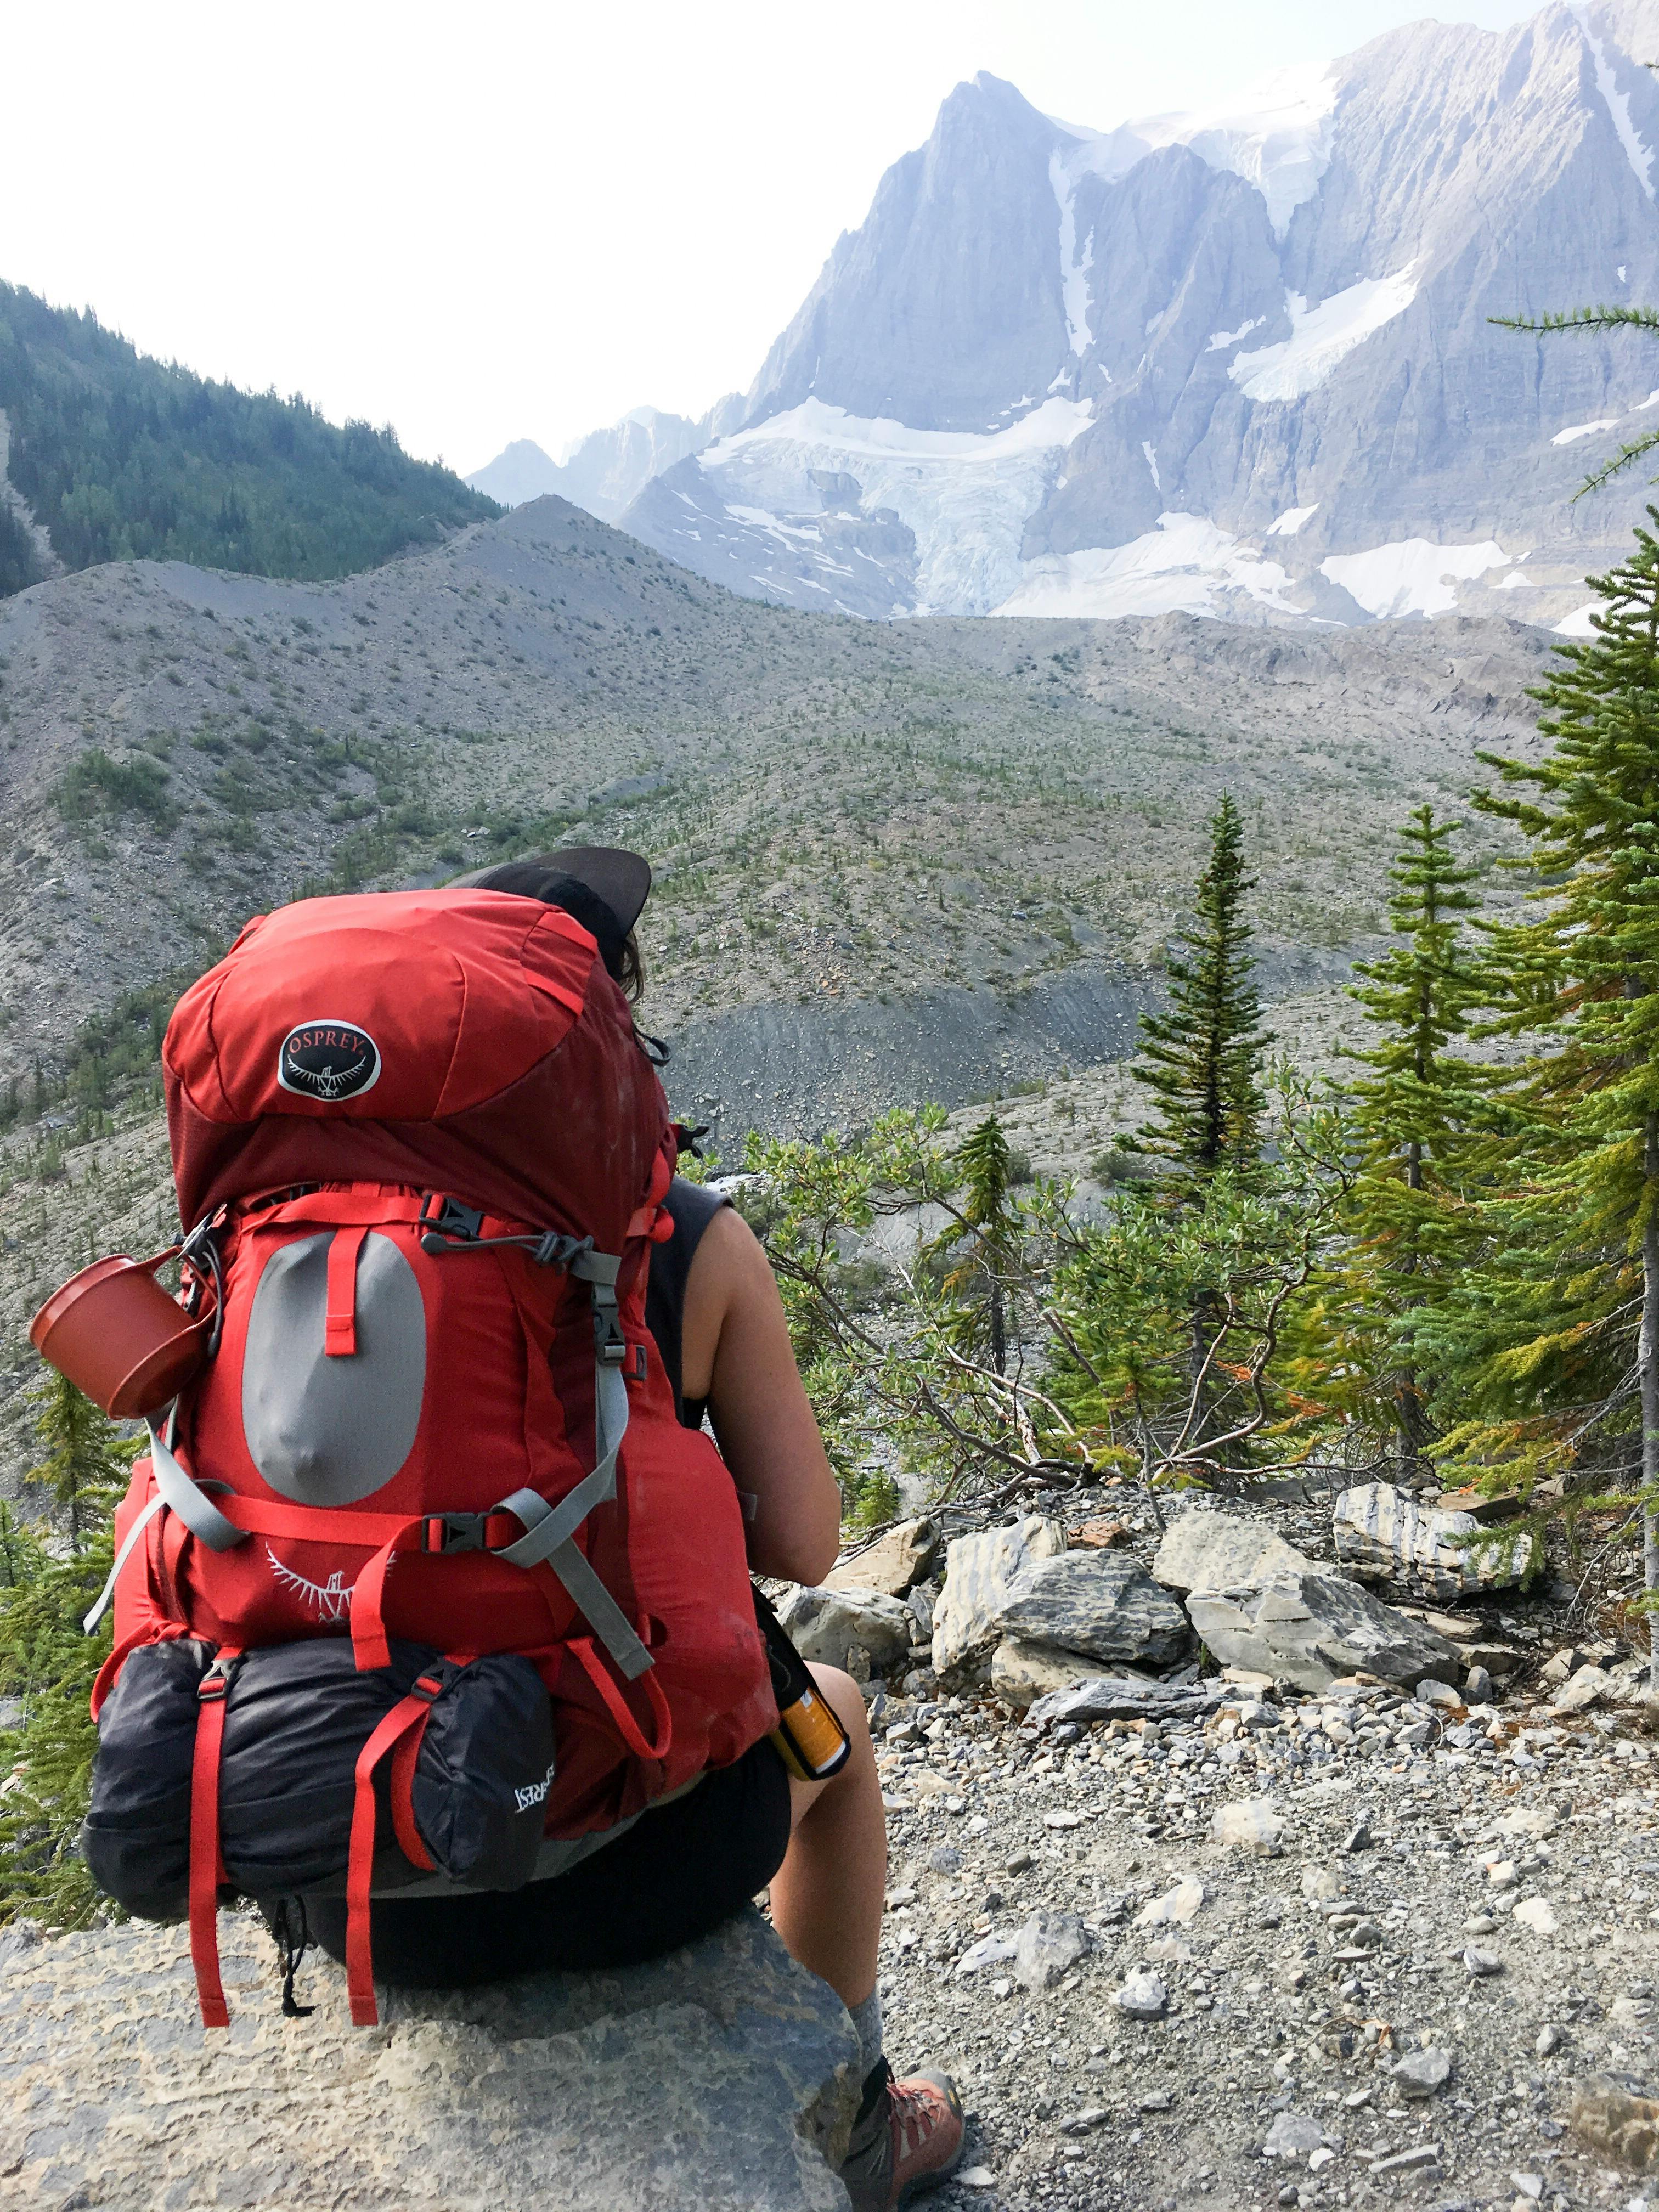 A person wearing a bright red backpacking pack sits facing away from the camera and towards mountains and trees